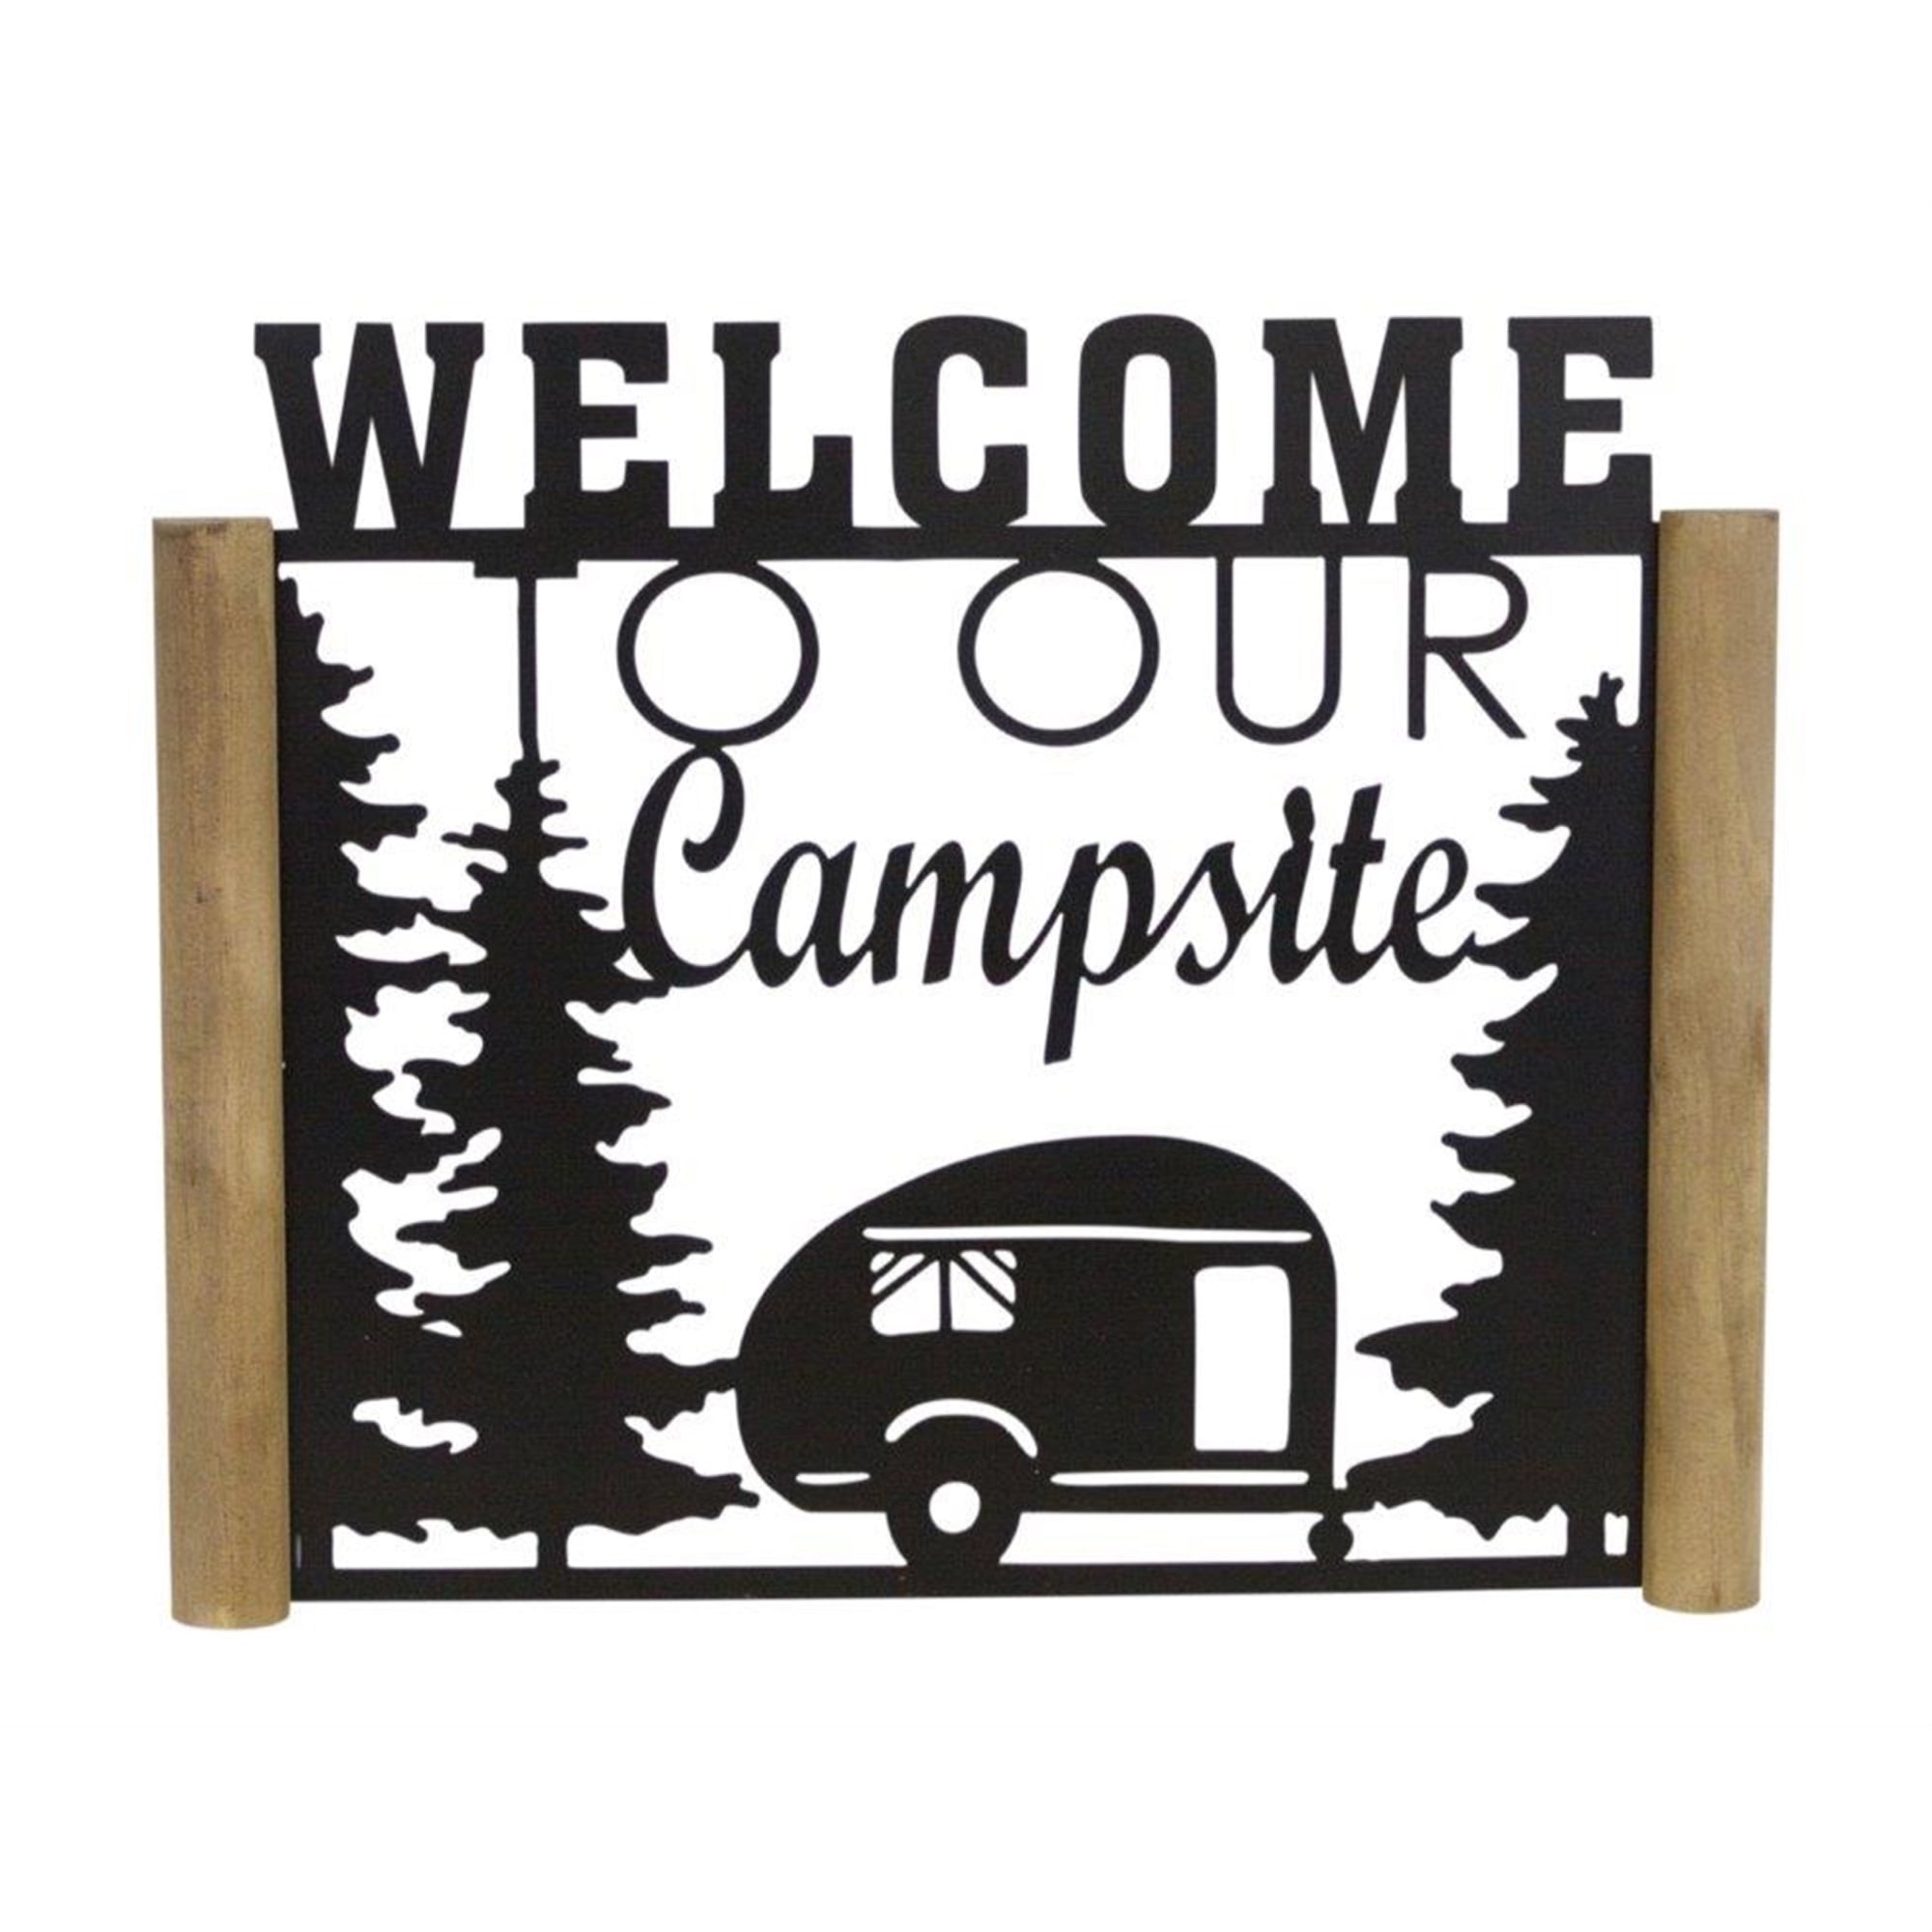 Welcome To Our Campsite 13.25"L x 10.75"H Metal/Wood